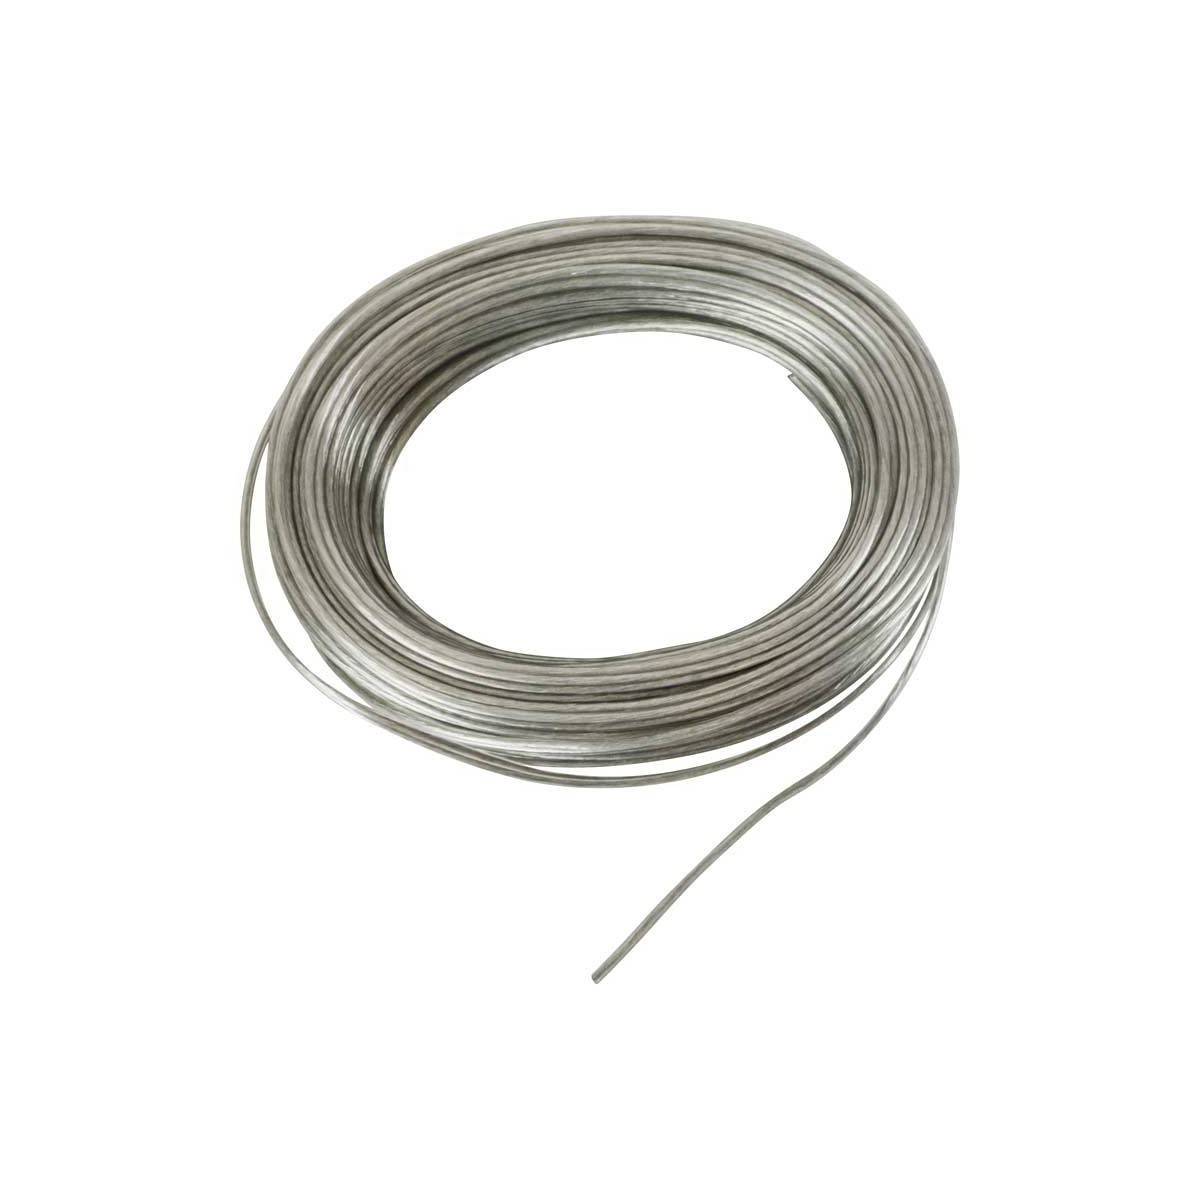 TRANSPARENT ELECTRIC CABLE 2x1.5mm